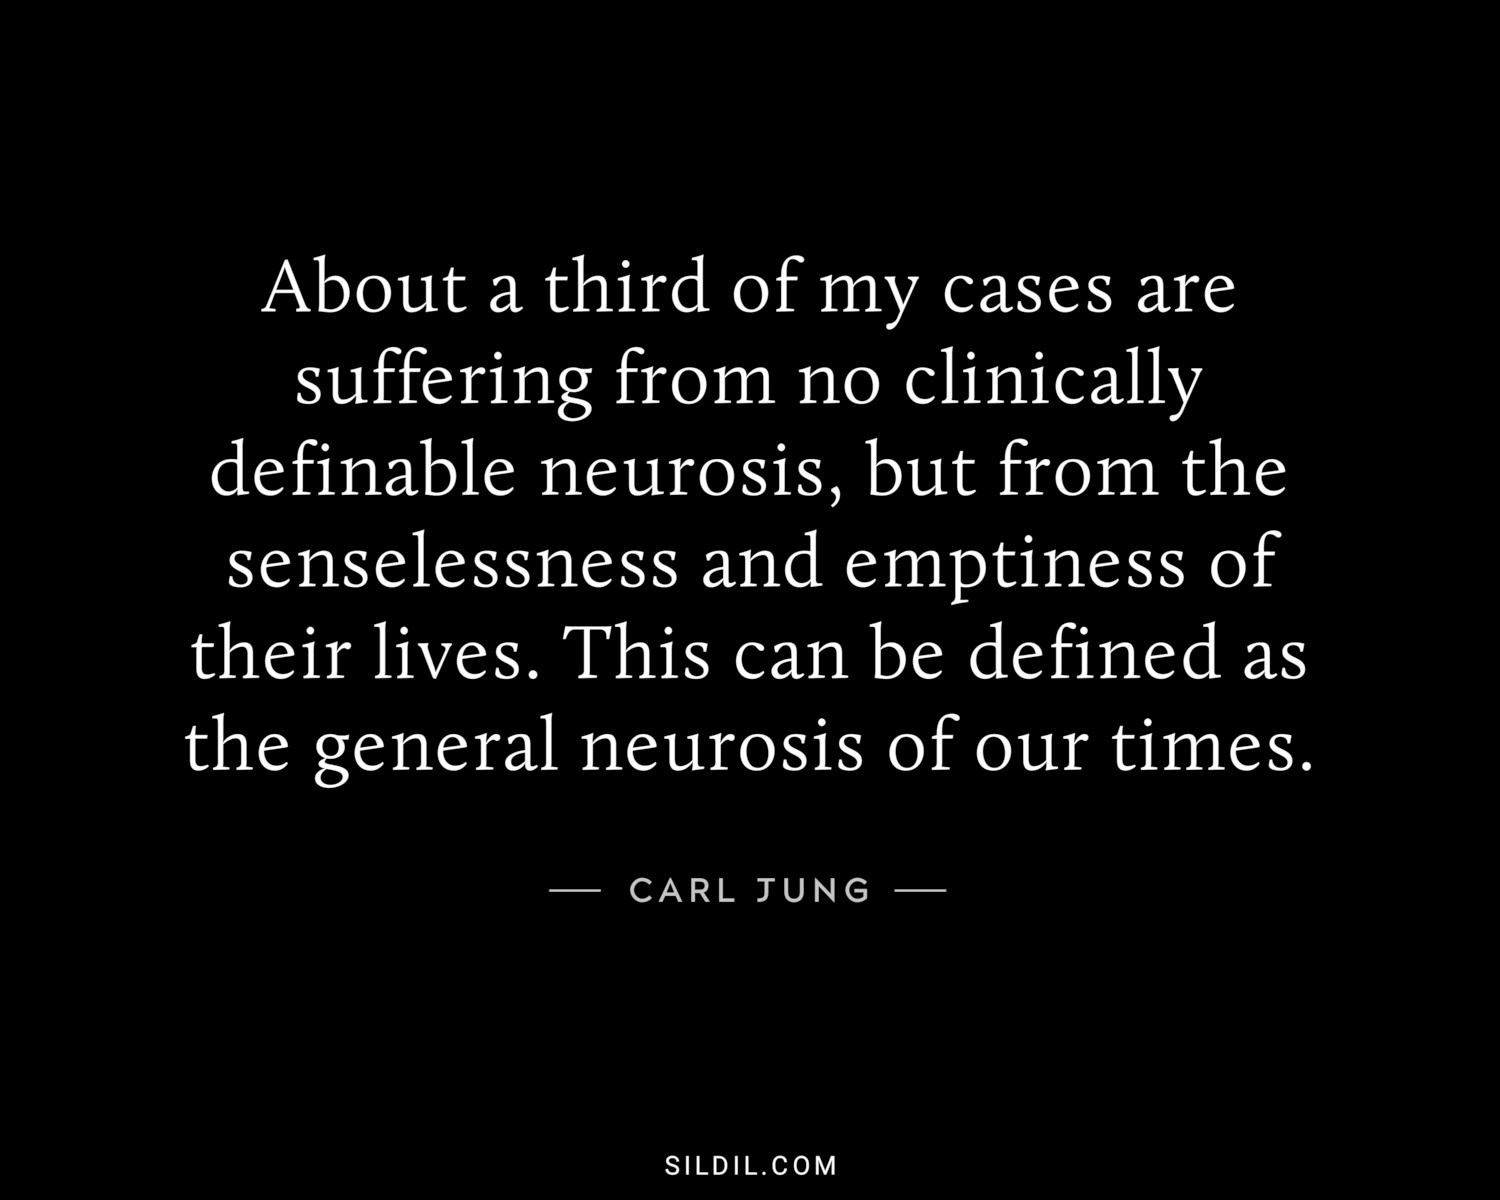 About a third of my cases are suffering from no clinically definable neurosis, but from the senselessness and emptiness of their lives. This can be defined as the general neurosis of our times.